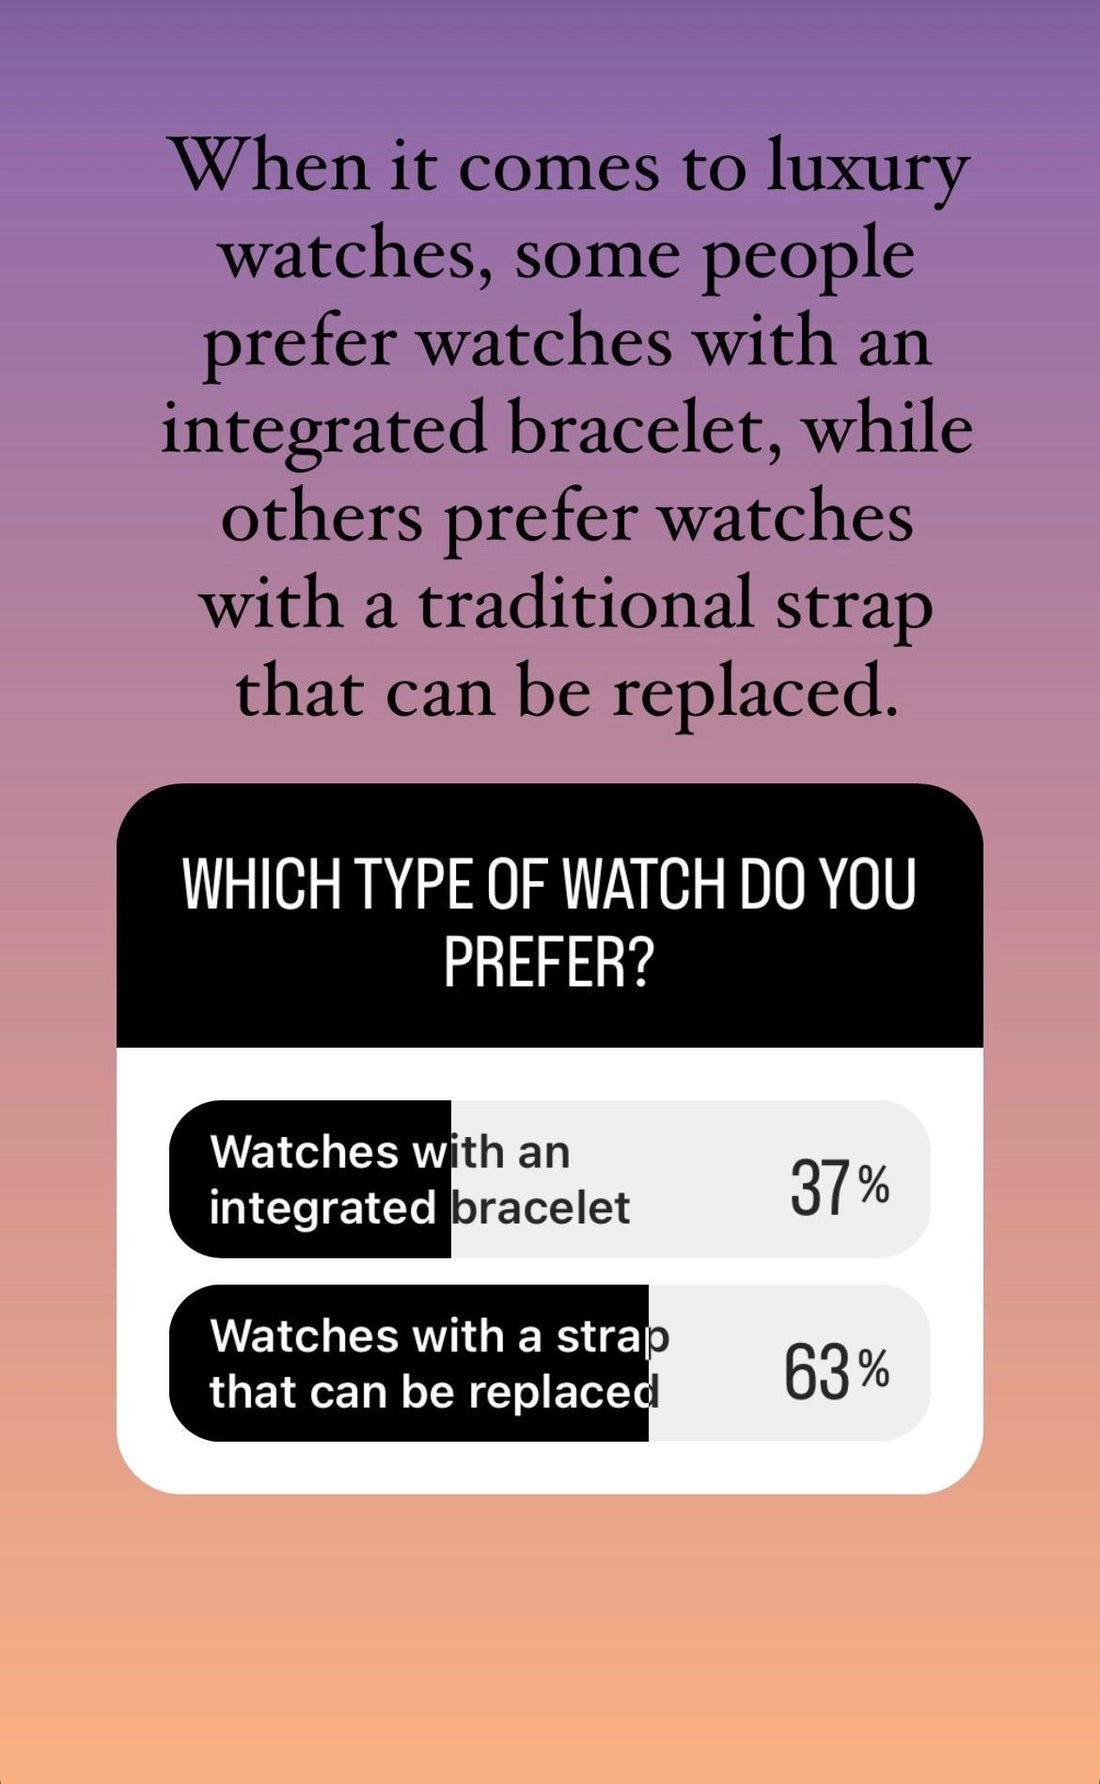 Traditional Replaceable Straps Triumph Over Integrated Bracelets